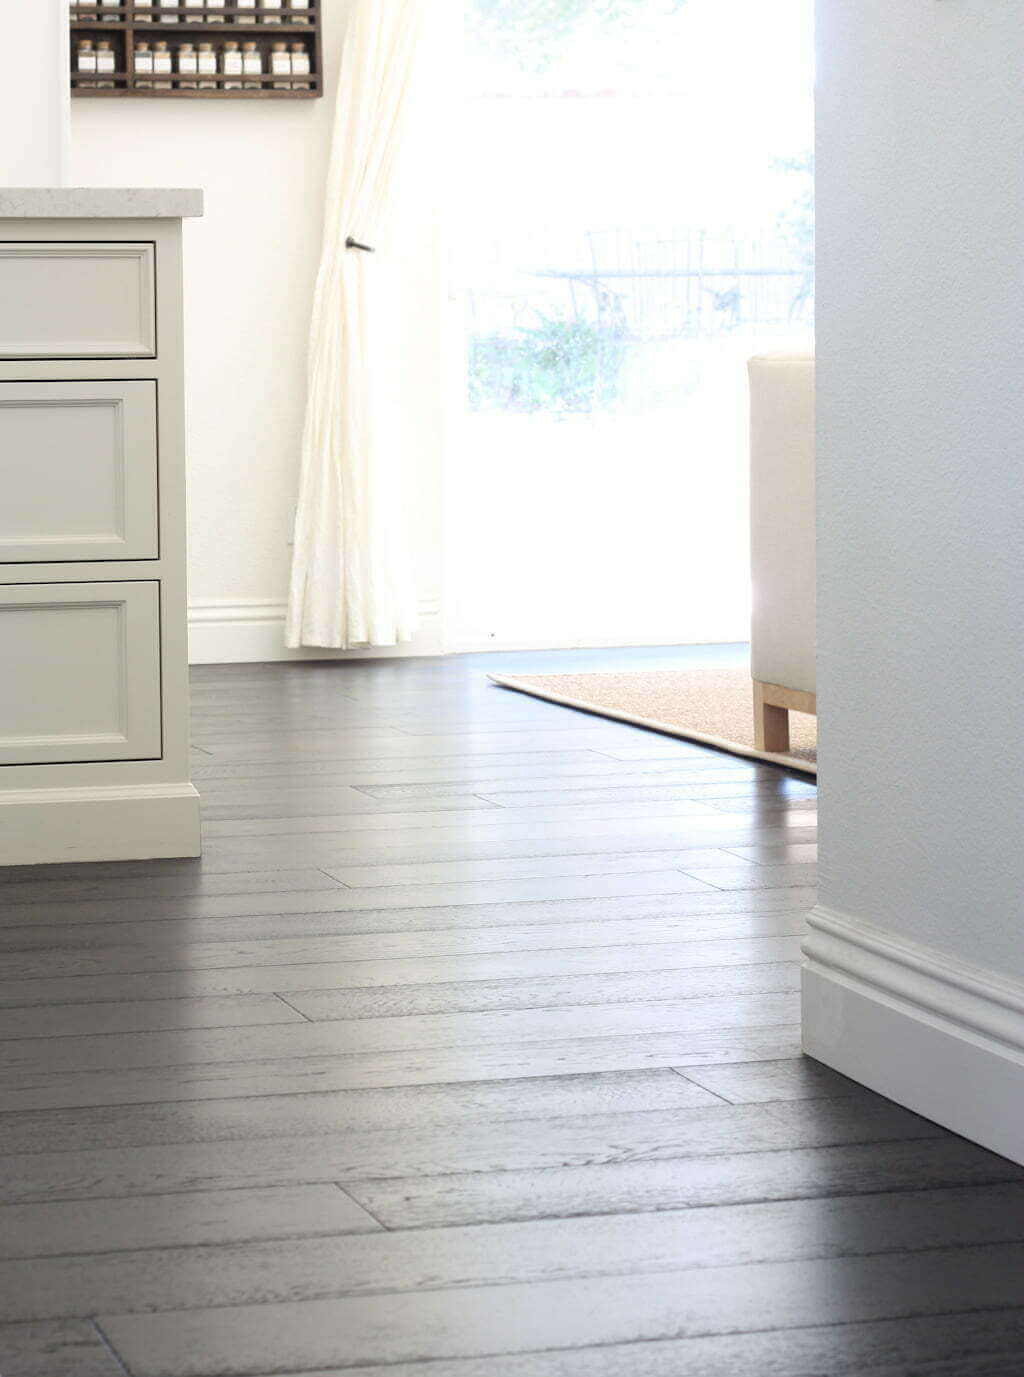 Should you choose hardwood or carpet? Flooring pros and cons